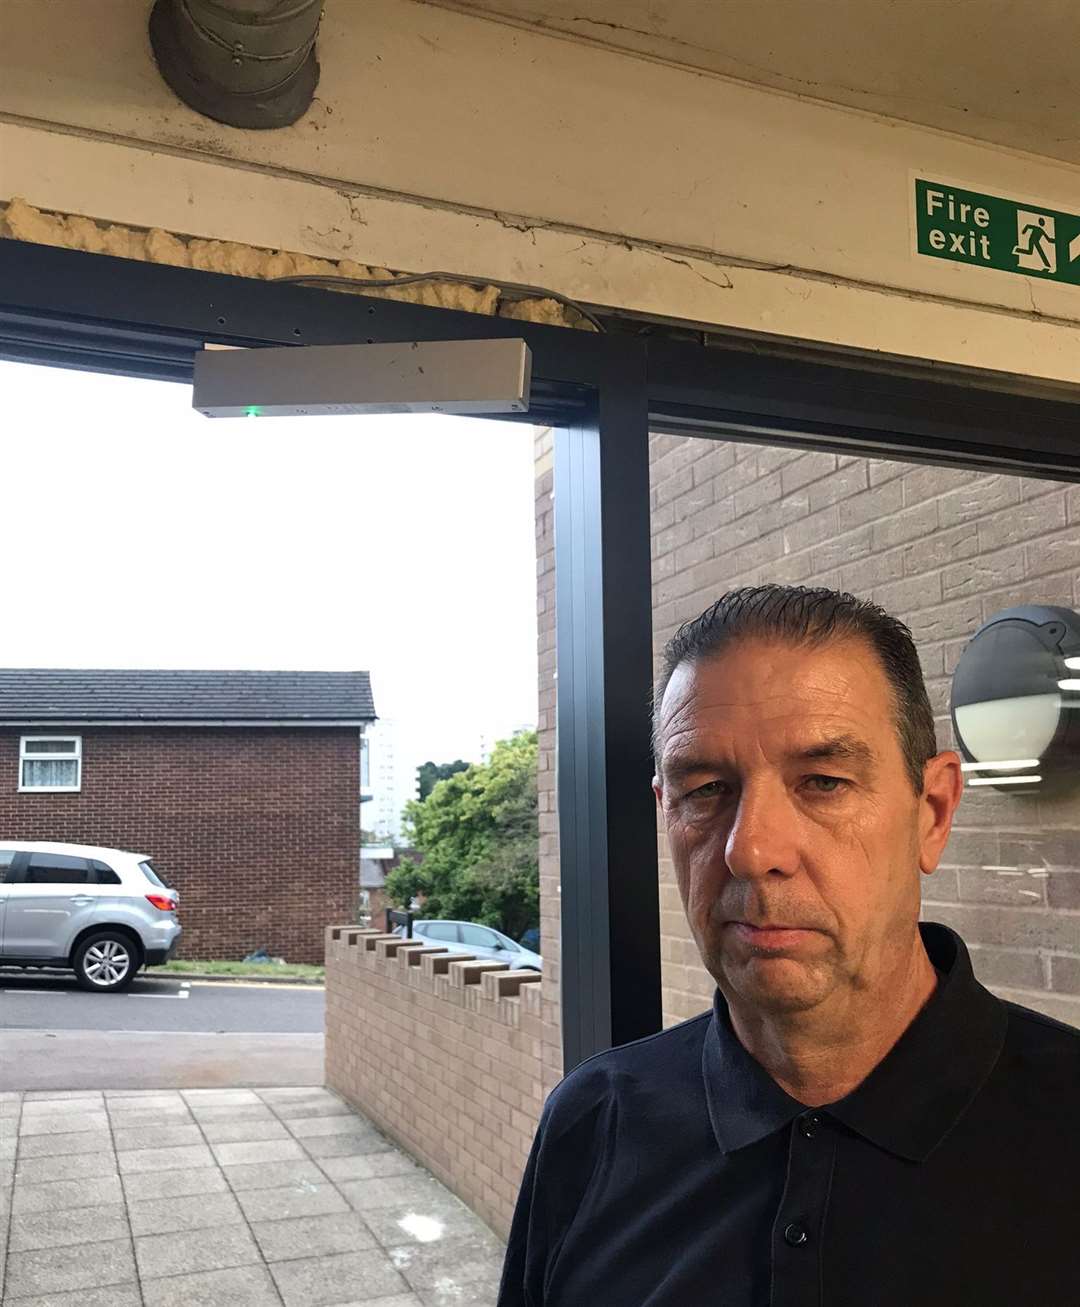 John Dexter says he's paying out maintenance because the property has been vandalised